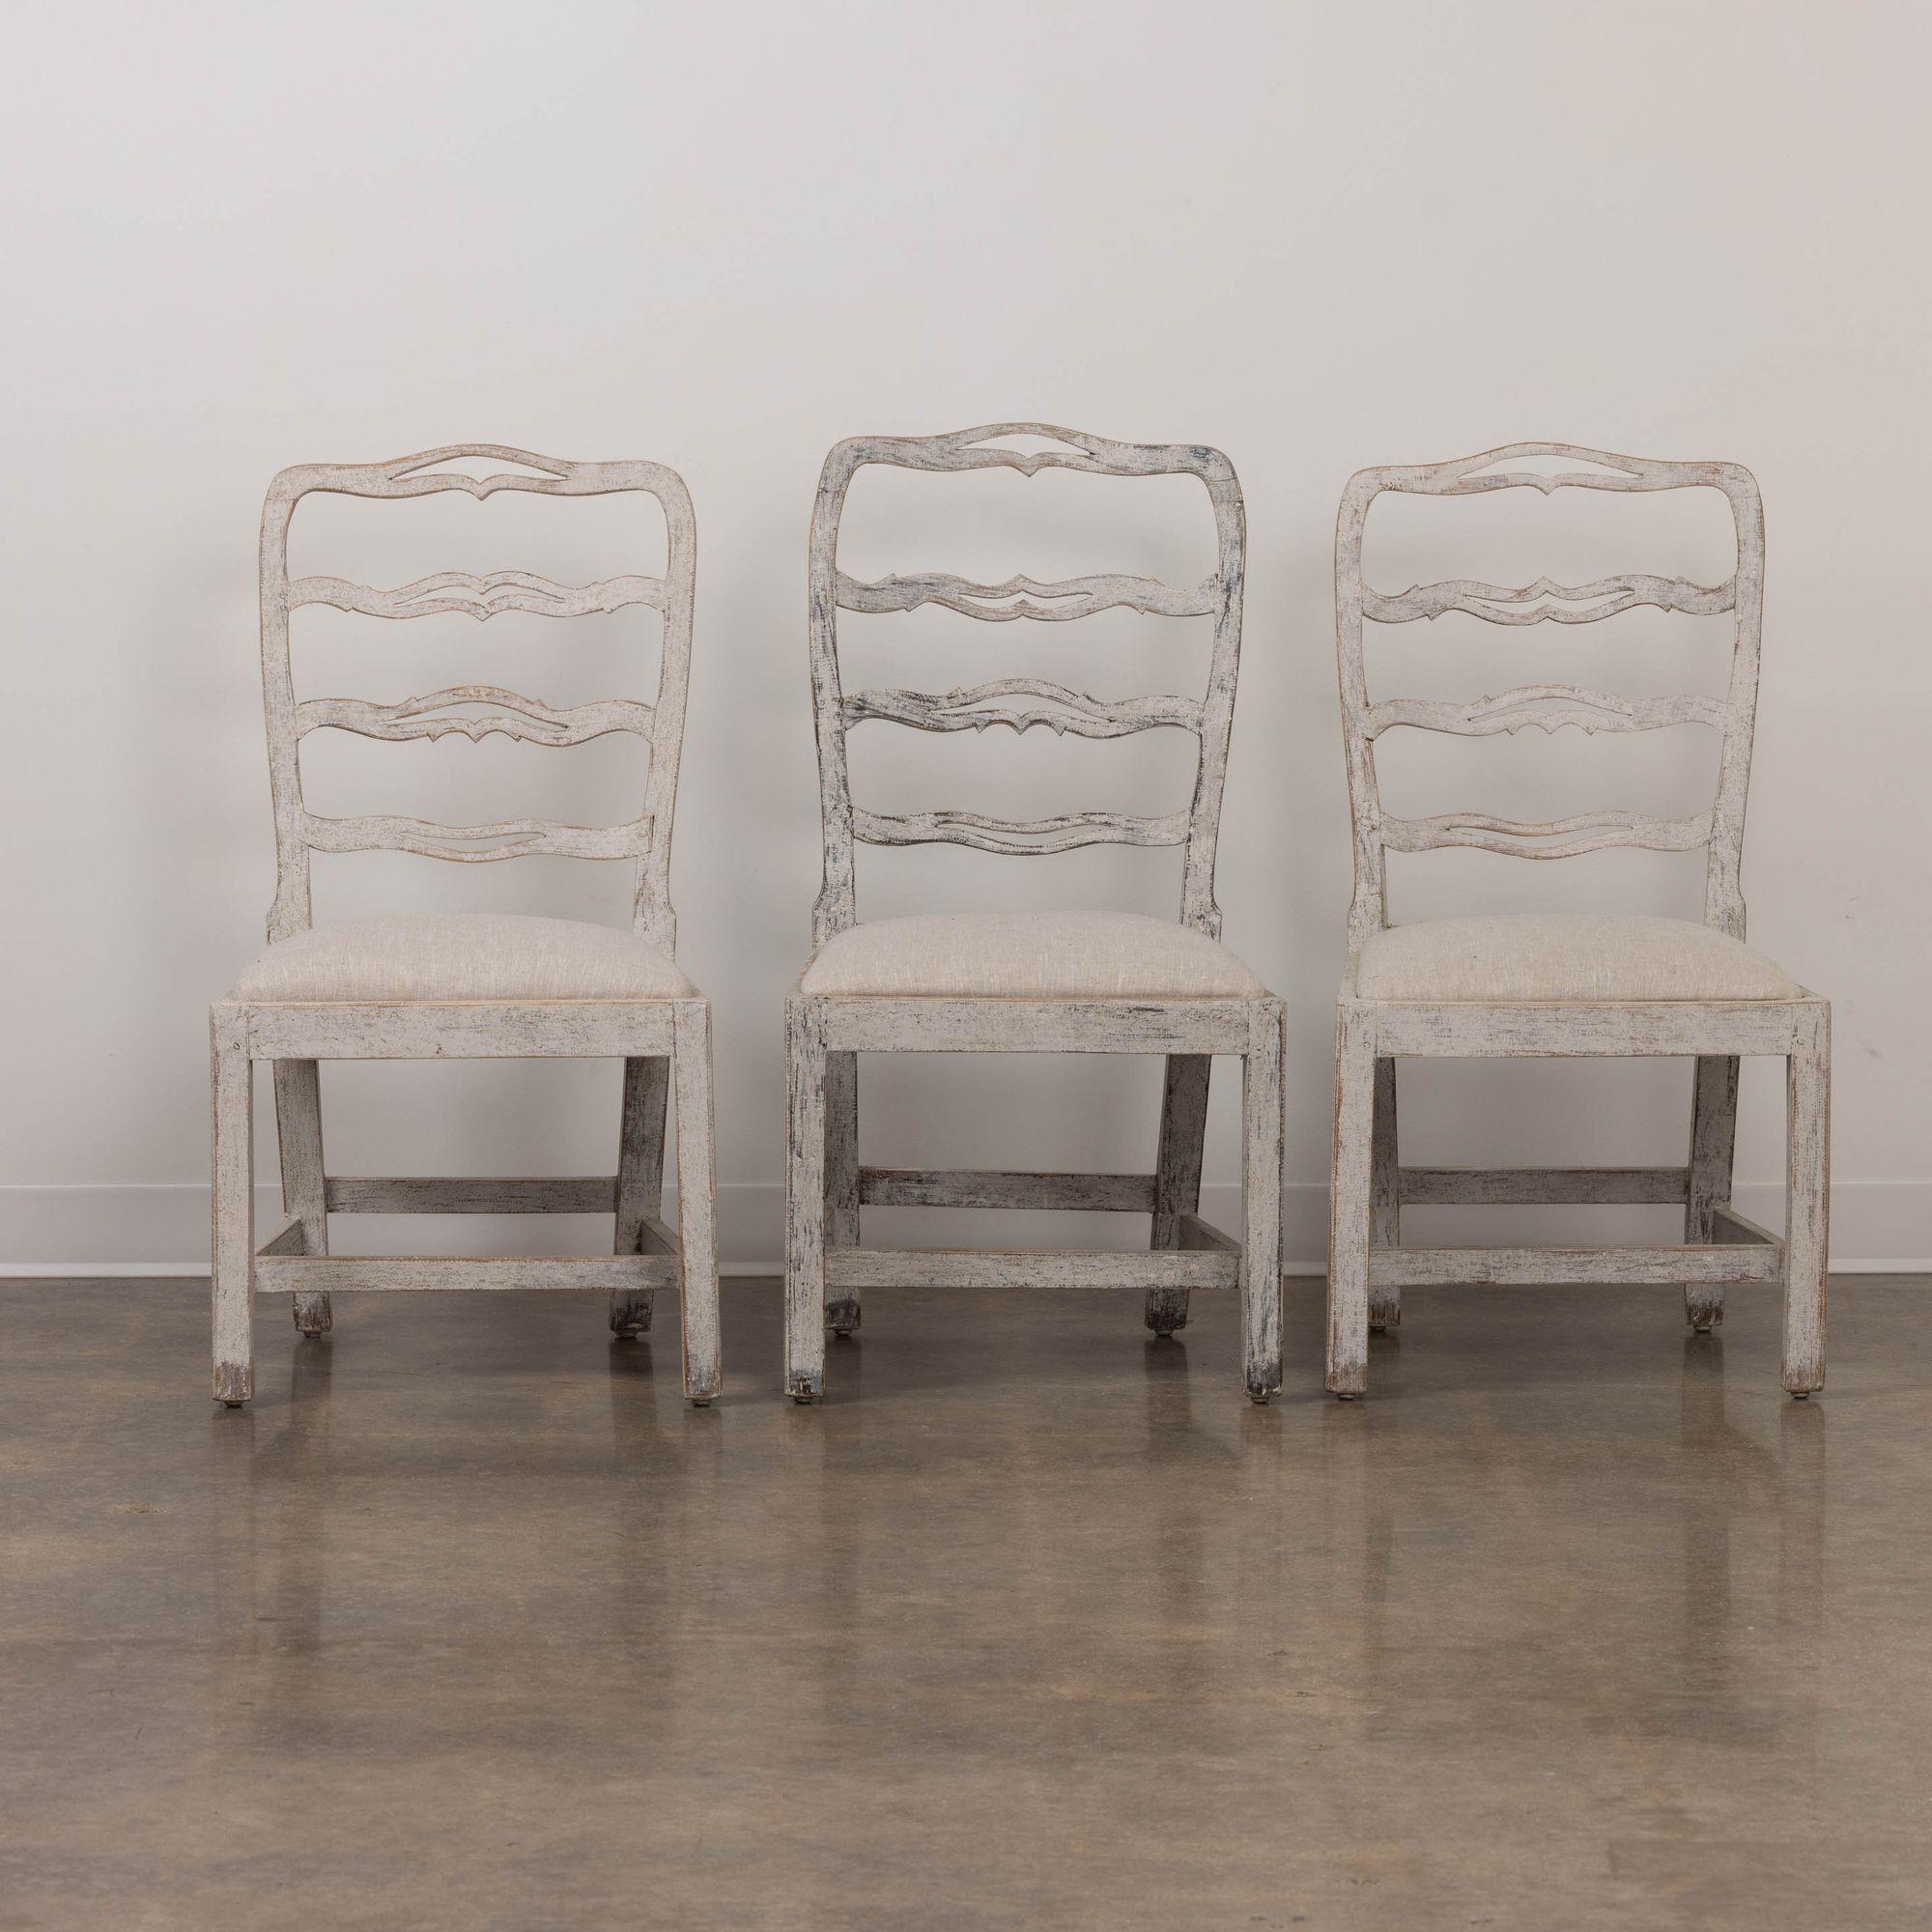 Set of Six Gustavian Period Painted Dining Chairs, 19th c. Swedish In Excellent Condition For Sale In Wichita, KS